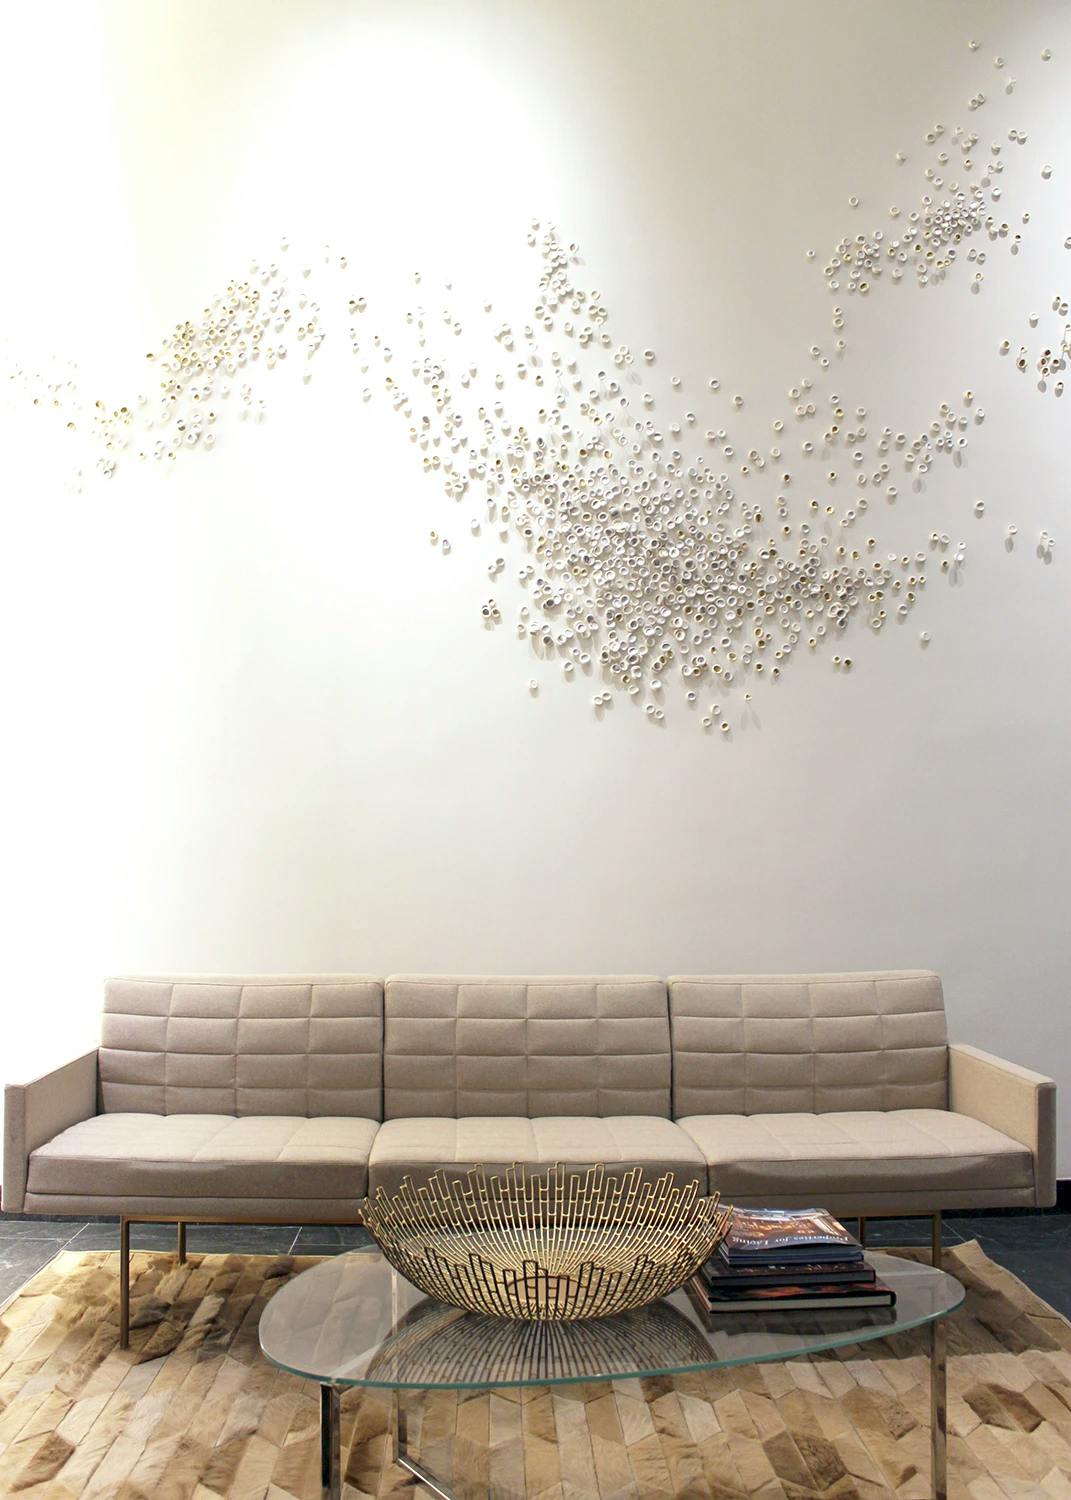 A custom porcelain installation by artist Christina Watka above a beige sofa in the lounge area of a modern residential building.